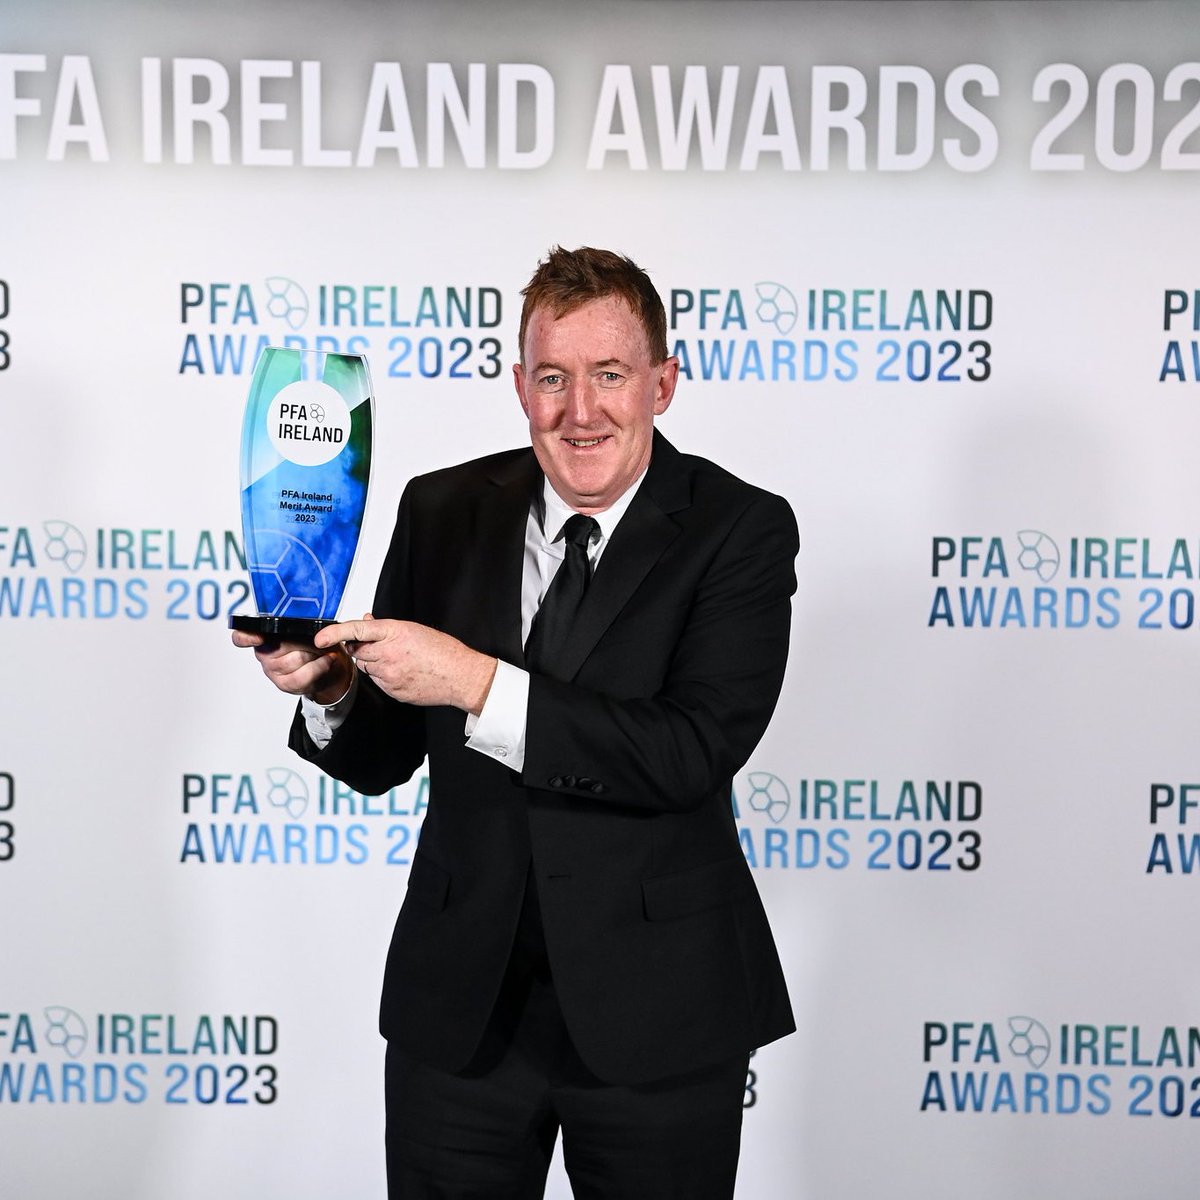 We would like to congratulate Prof. Stephen Eustace who has been awarded with the PFA Ireland Merit Award for 2023 🏅 #PFAIawards23 #LOI #recognisingtalent